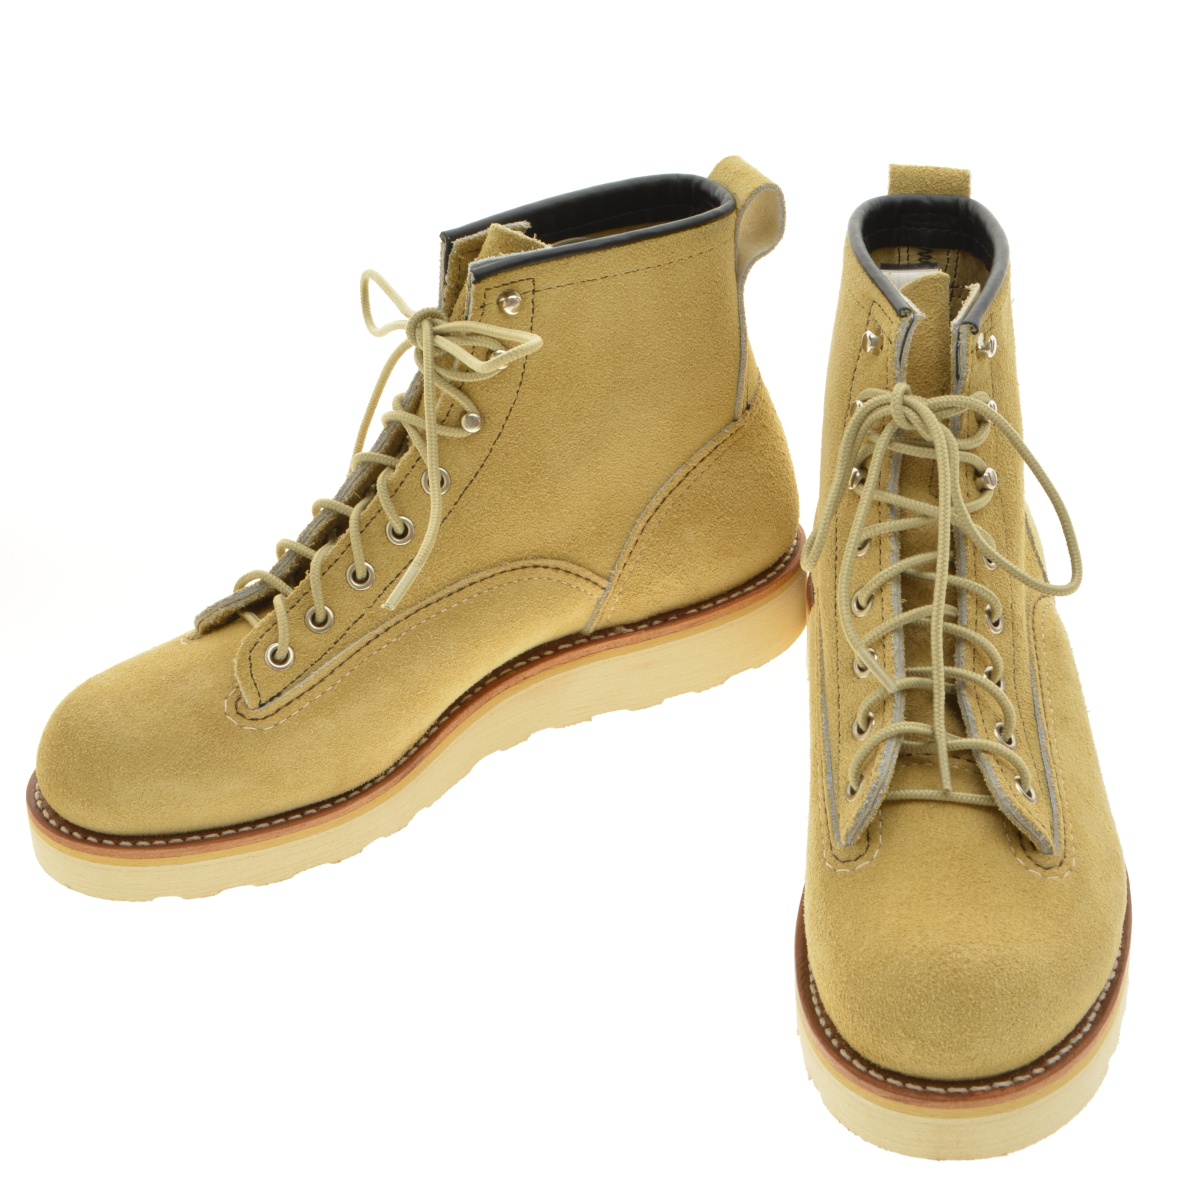 26cm RED WING 藤井隆行 藤井 LINEMAN 02900 | www.innoveering.net